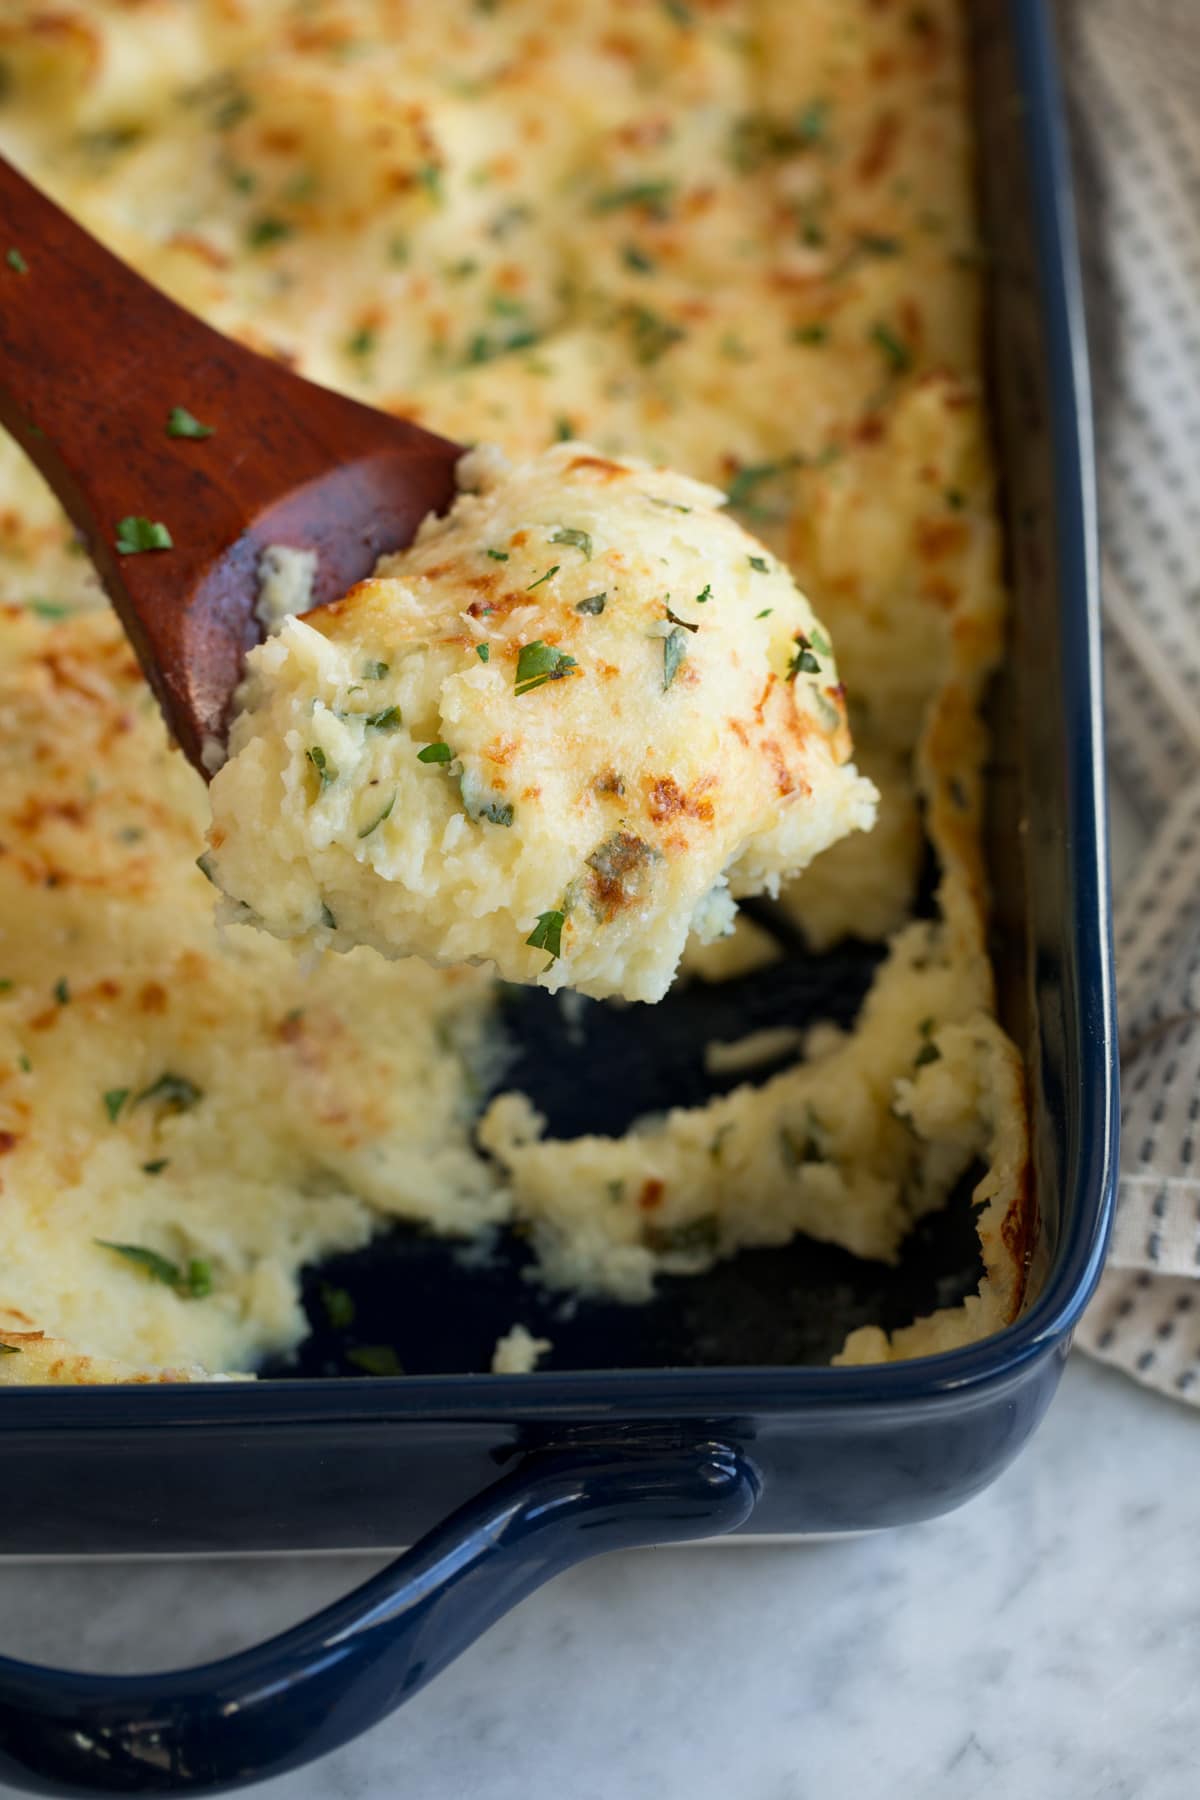 Baked Mashed Potatoes with Parmesan